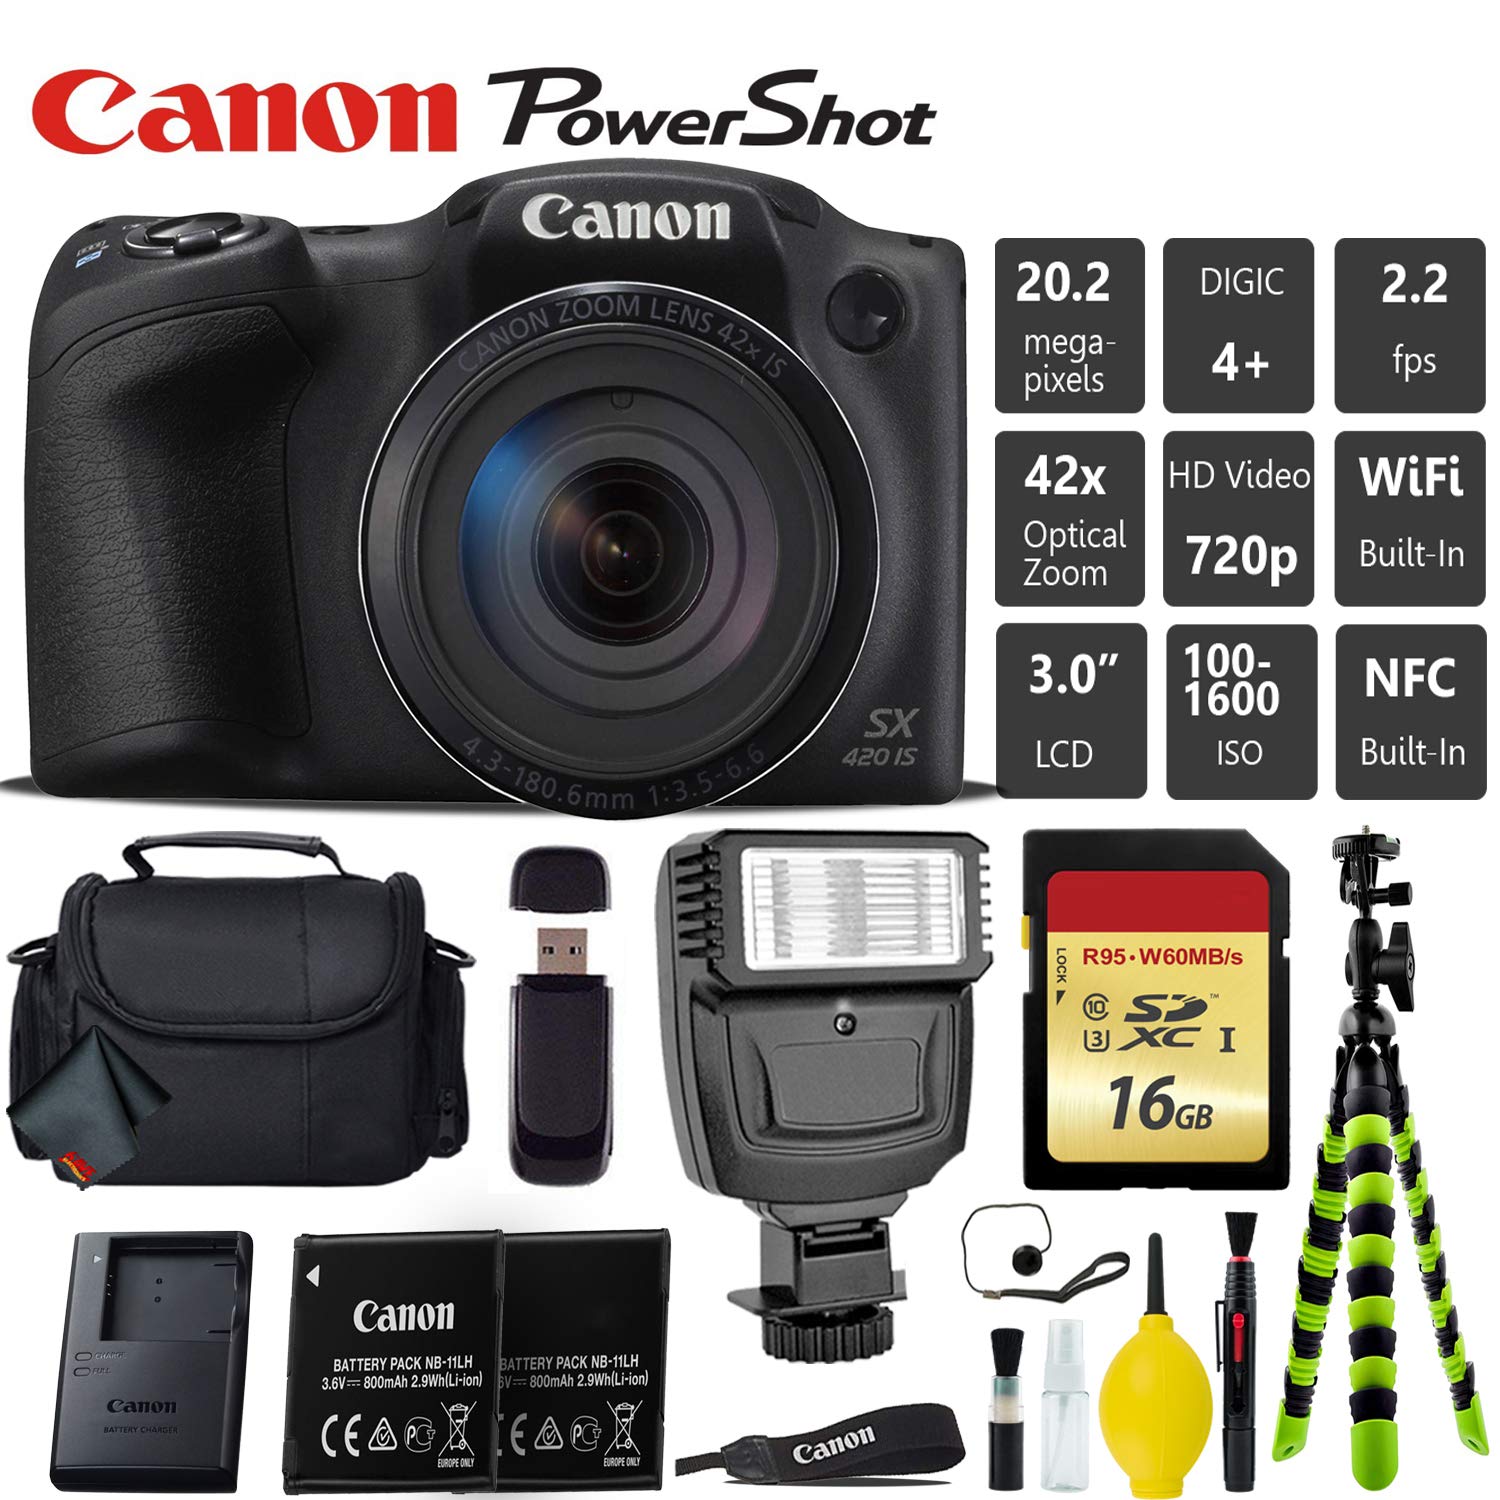 Canon PowerShot SX420 is Digital Point and Shoot Camera + Extra Battery + Digital Flash + Camera Case + 16GB Class 10 Me